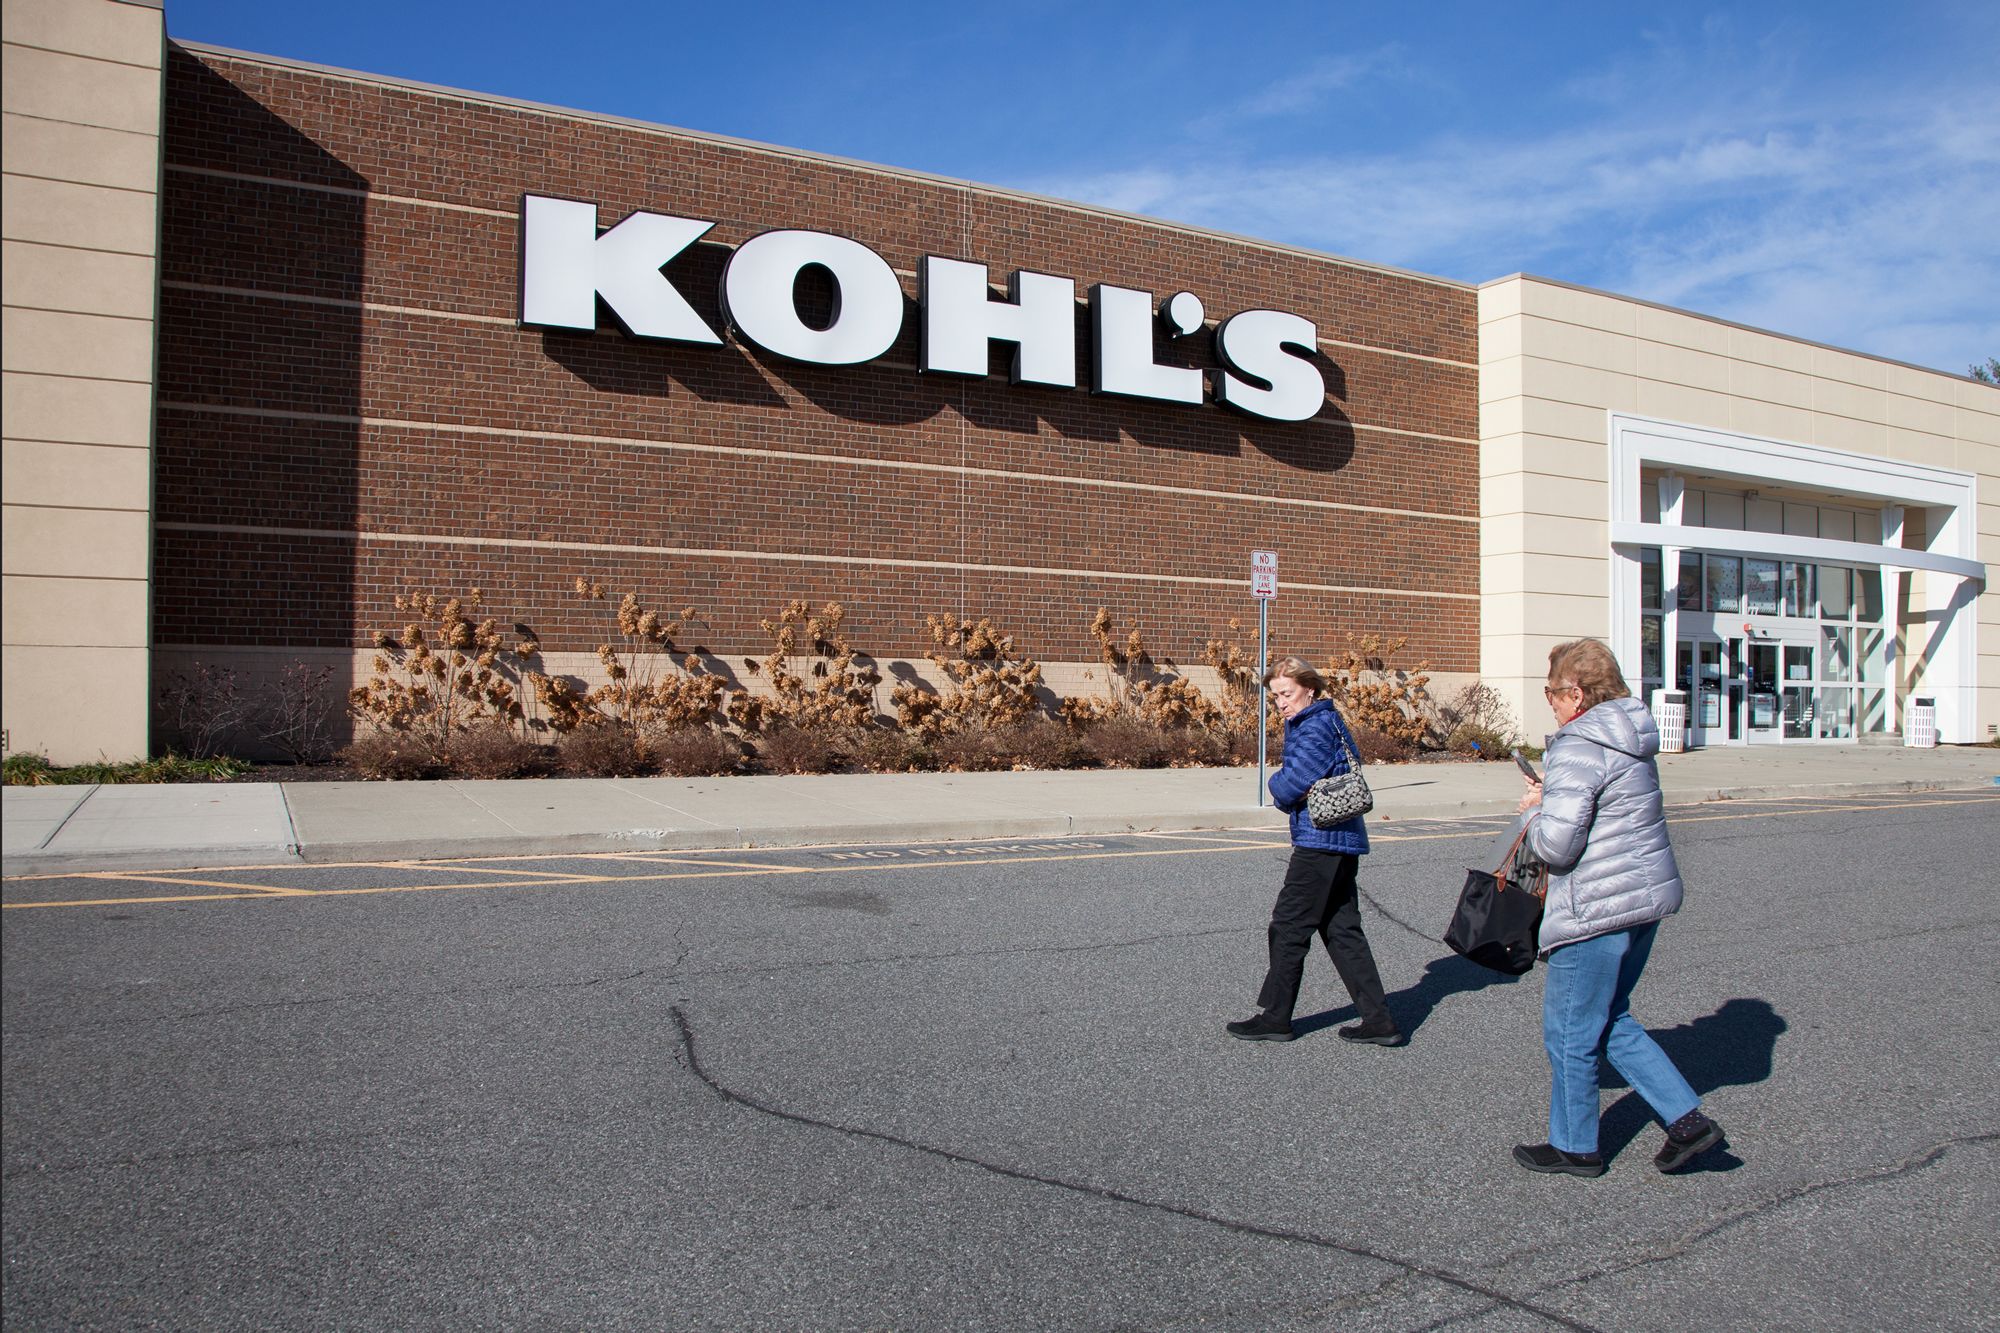 Kohl's reports first quarter 2019 earnings